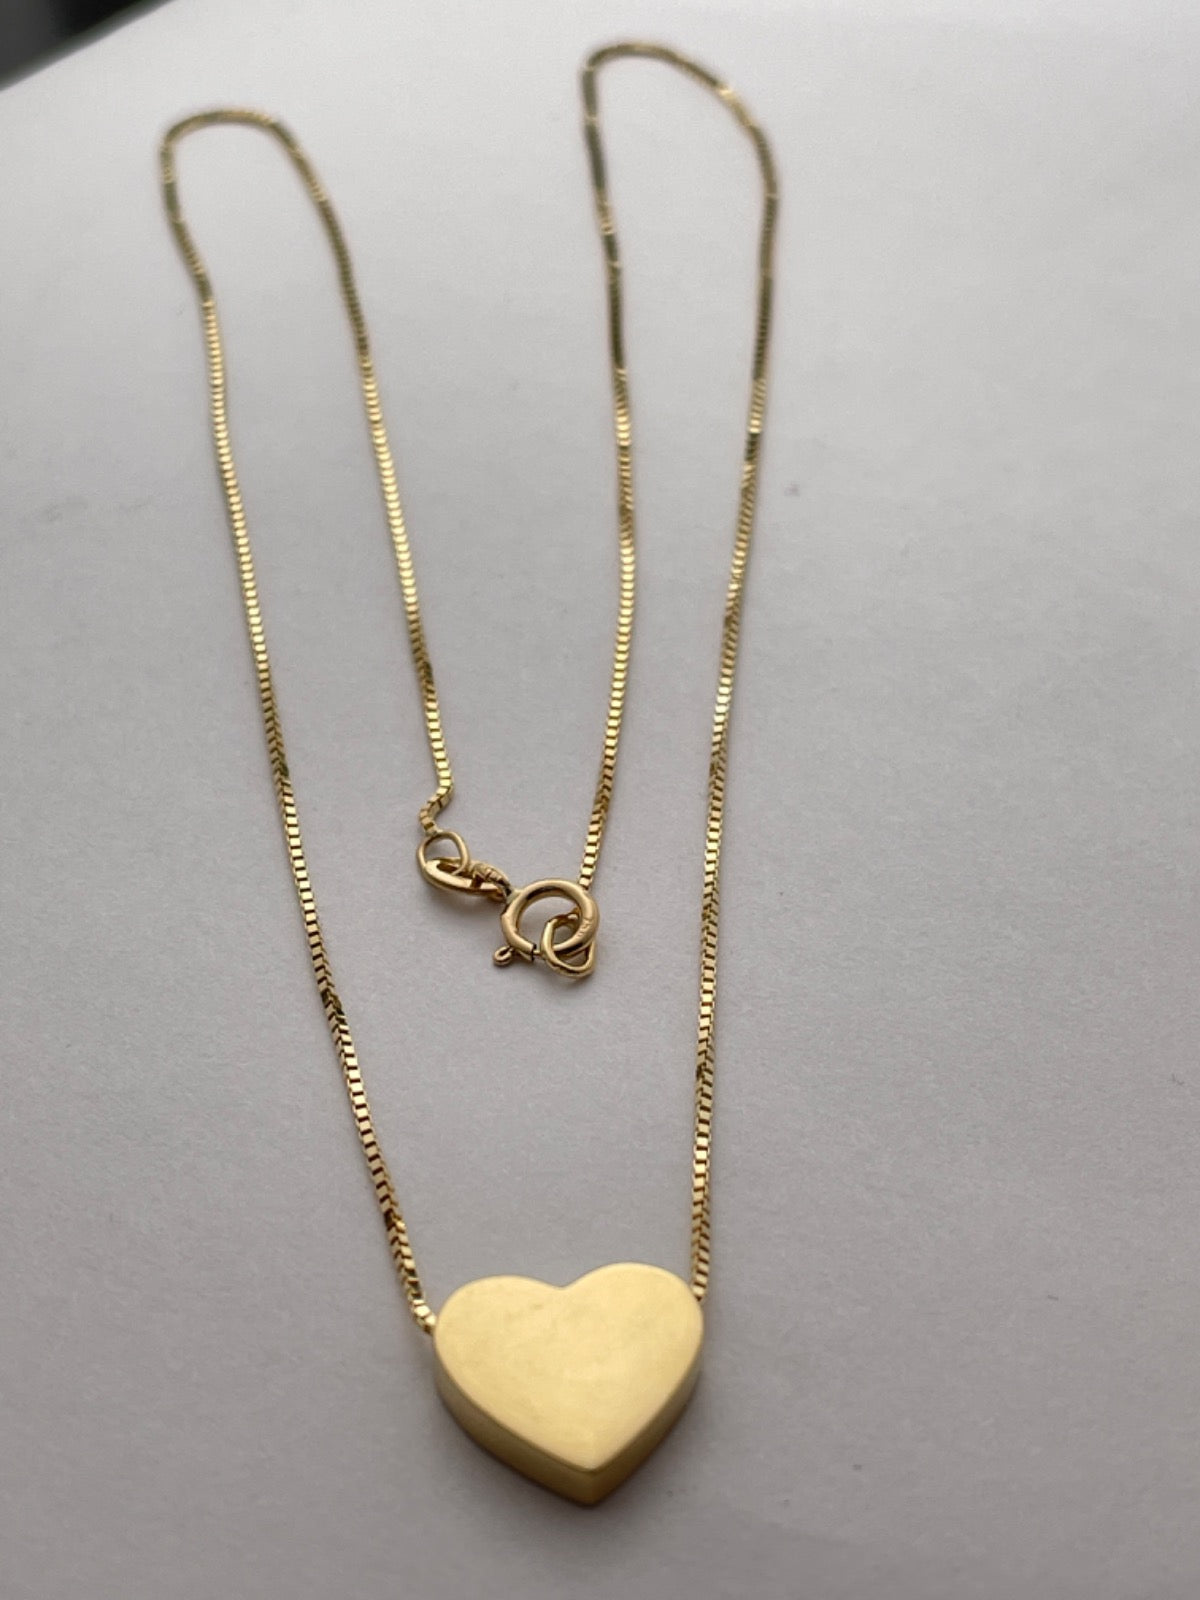 18K Yellow Gold, Charm Necklace Collection